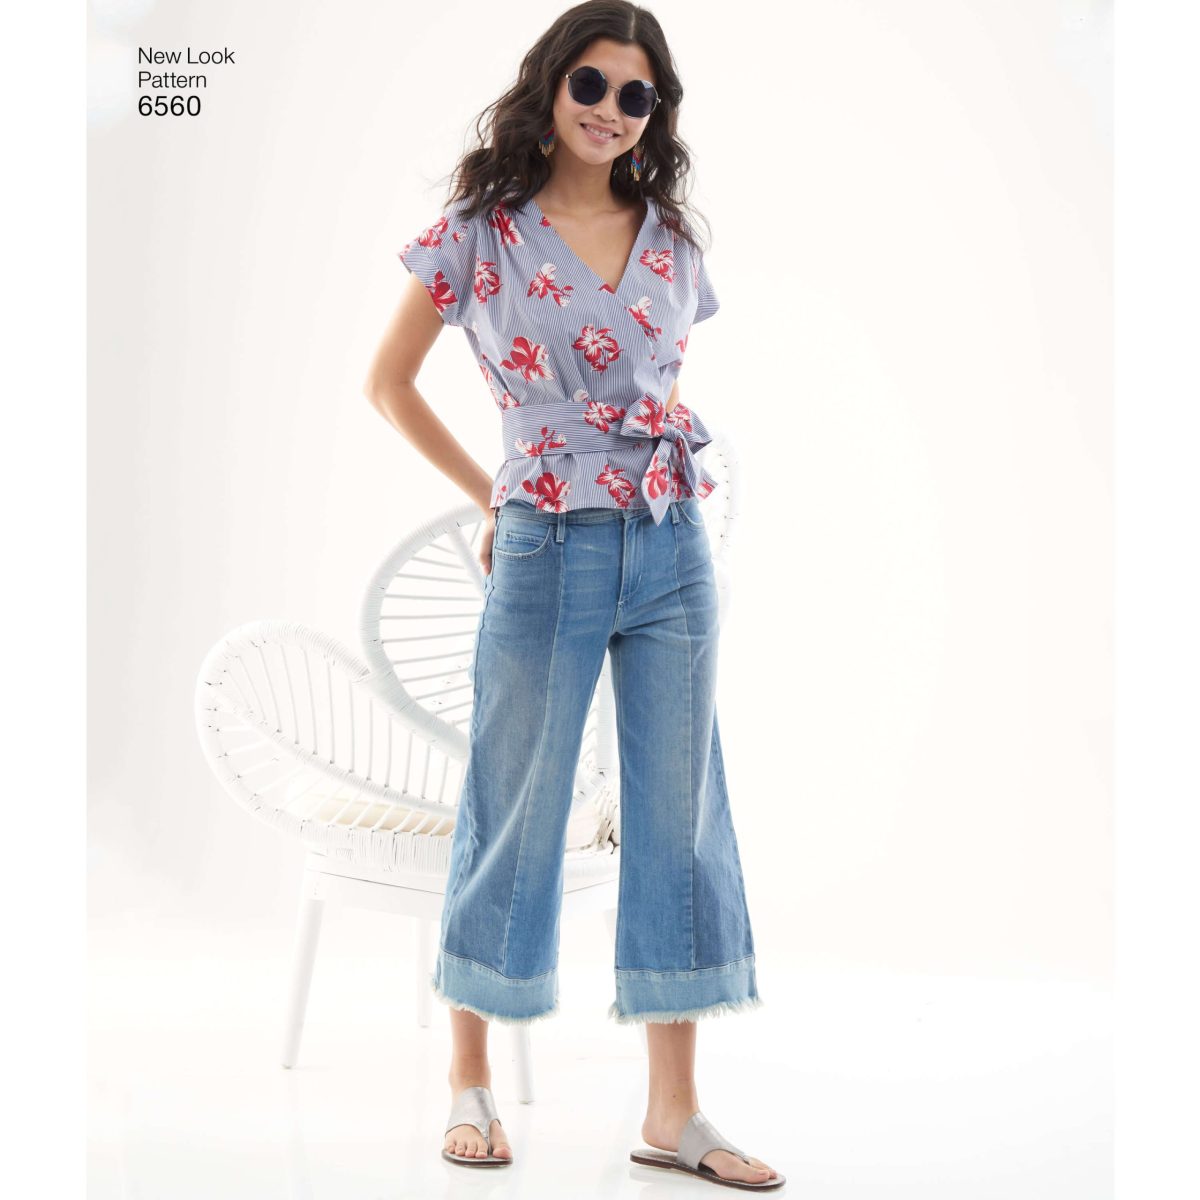 New Look Pattern 6560 Misses' Wrap Tops